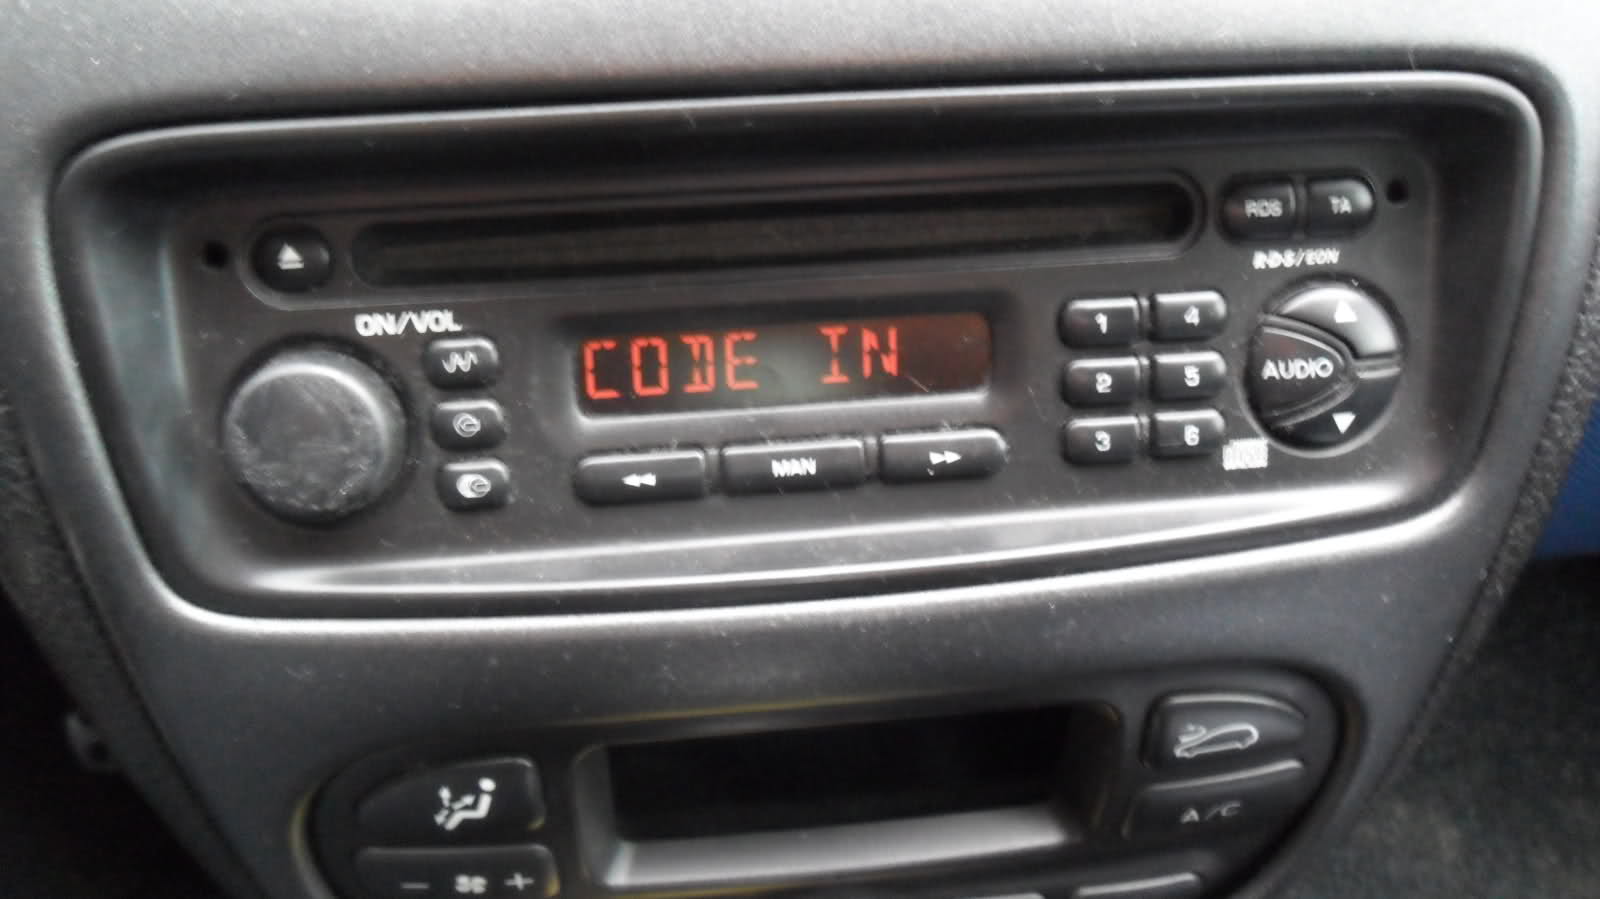 How to install the car stereo PEUGEOT 206 📻 